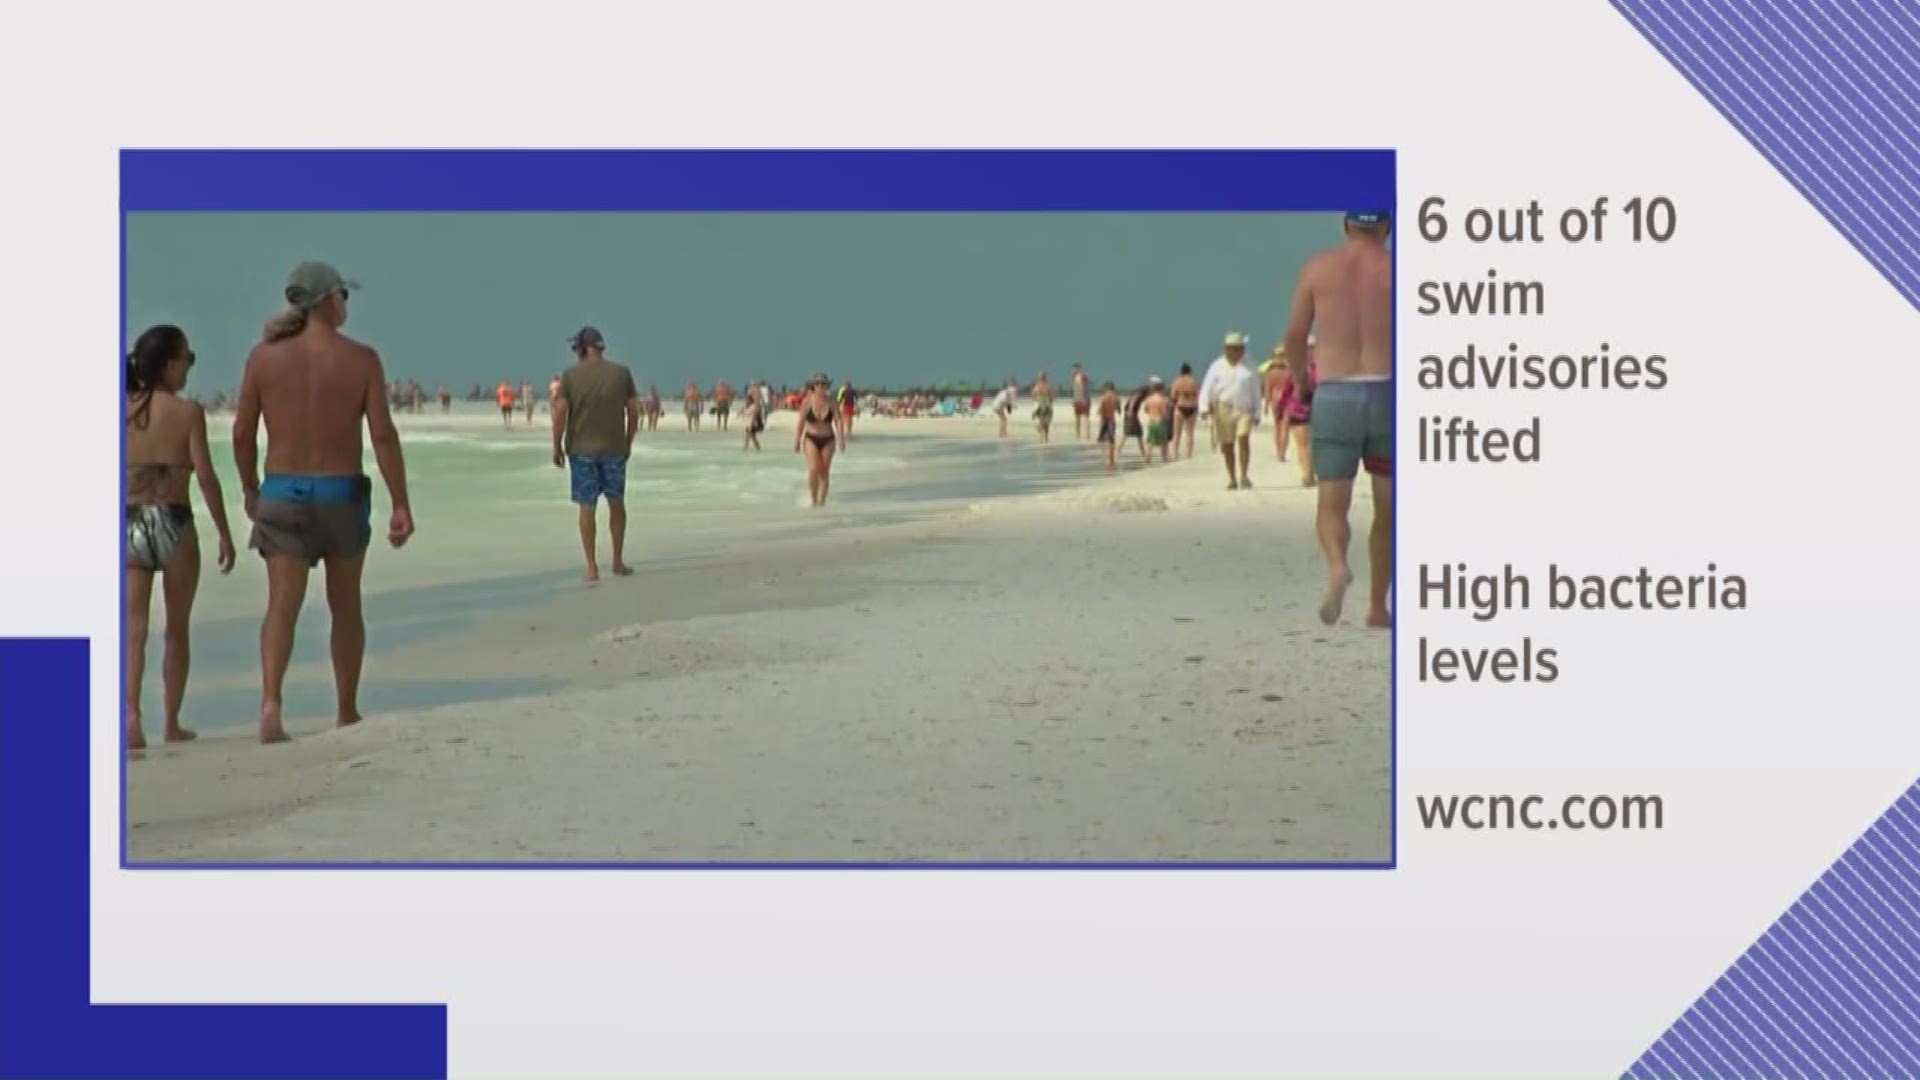 Some of Myrtle Beach swim advisories lifted